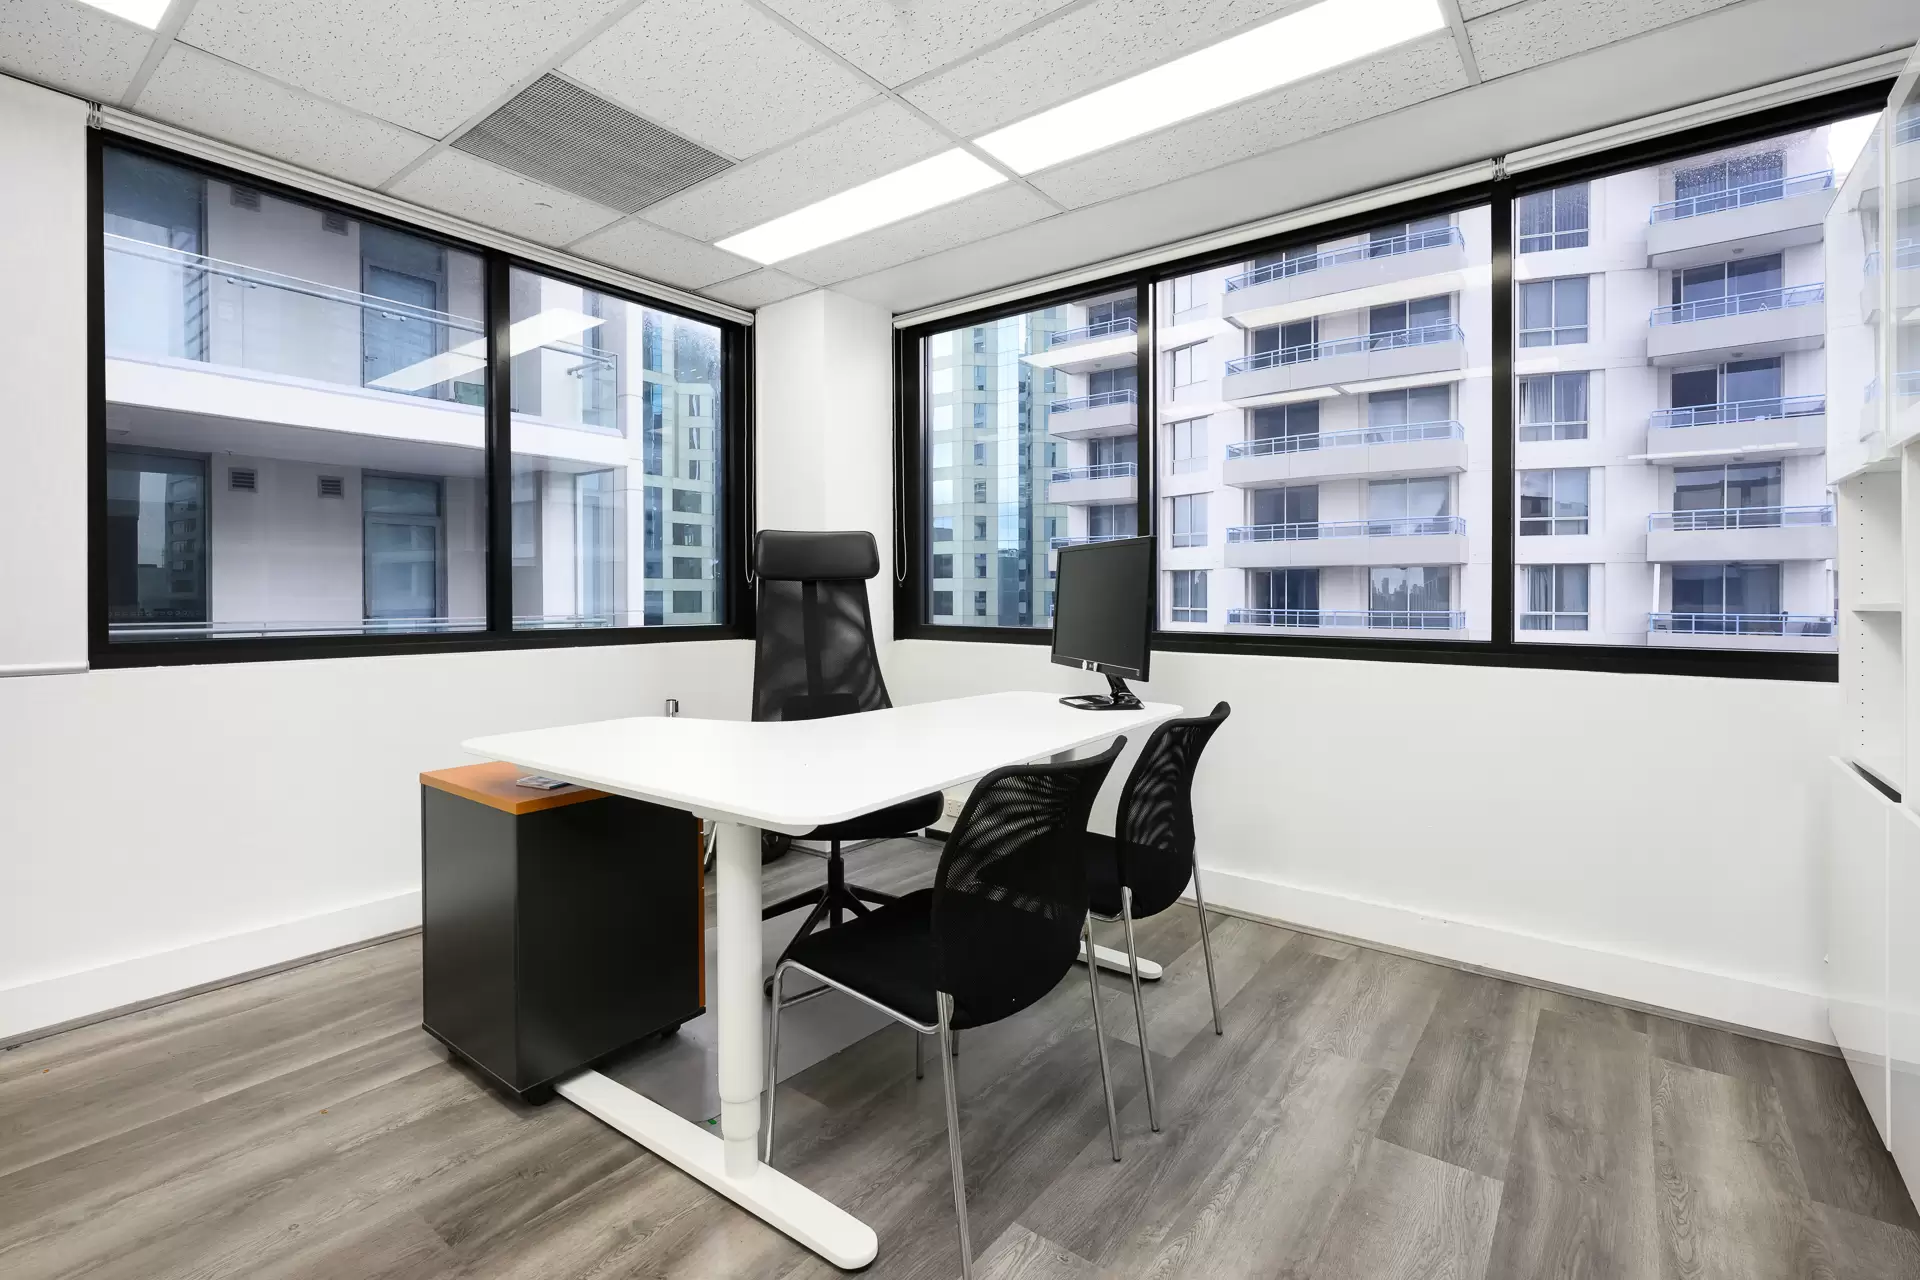 Suite 602/12 Thomas Street, Chatswood Sold by Shead Property - image 1